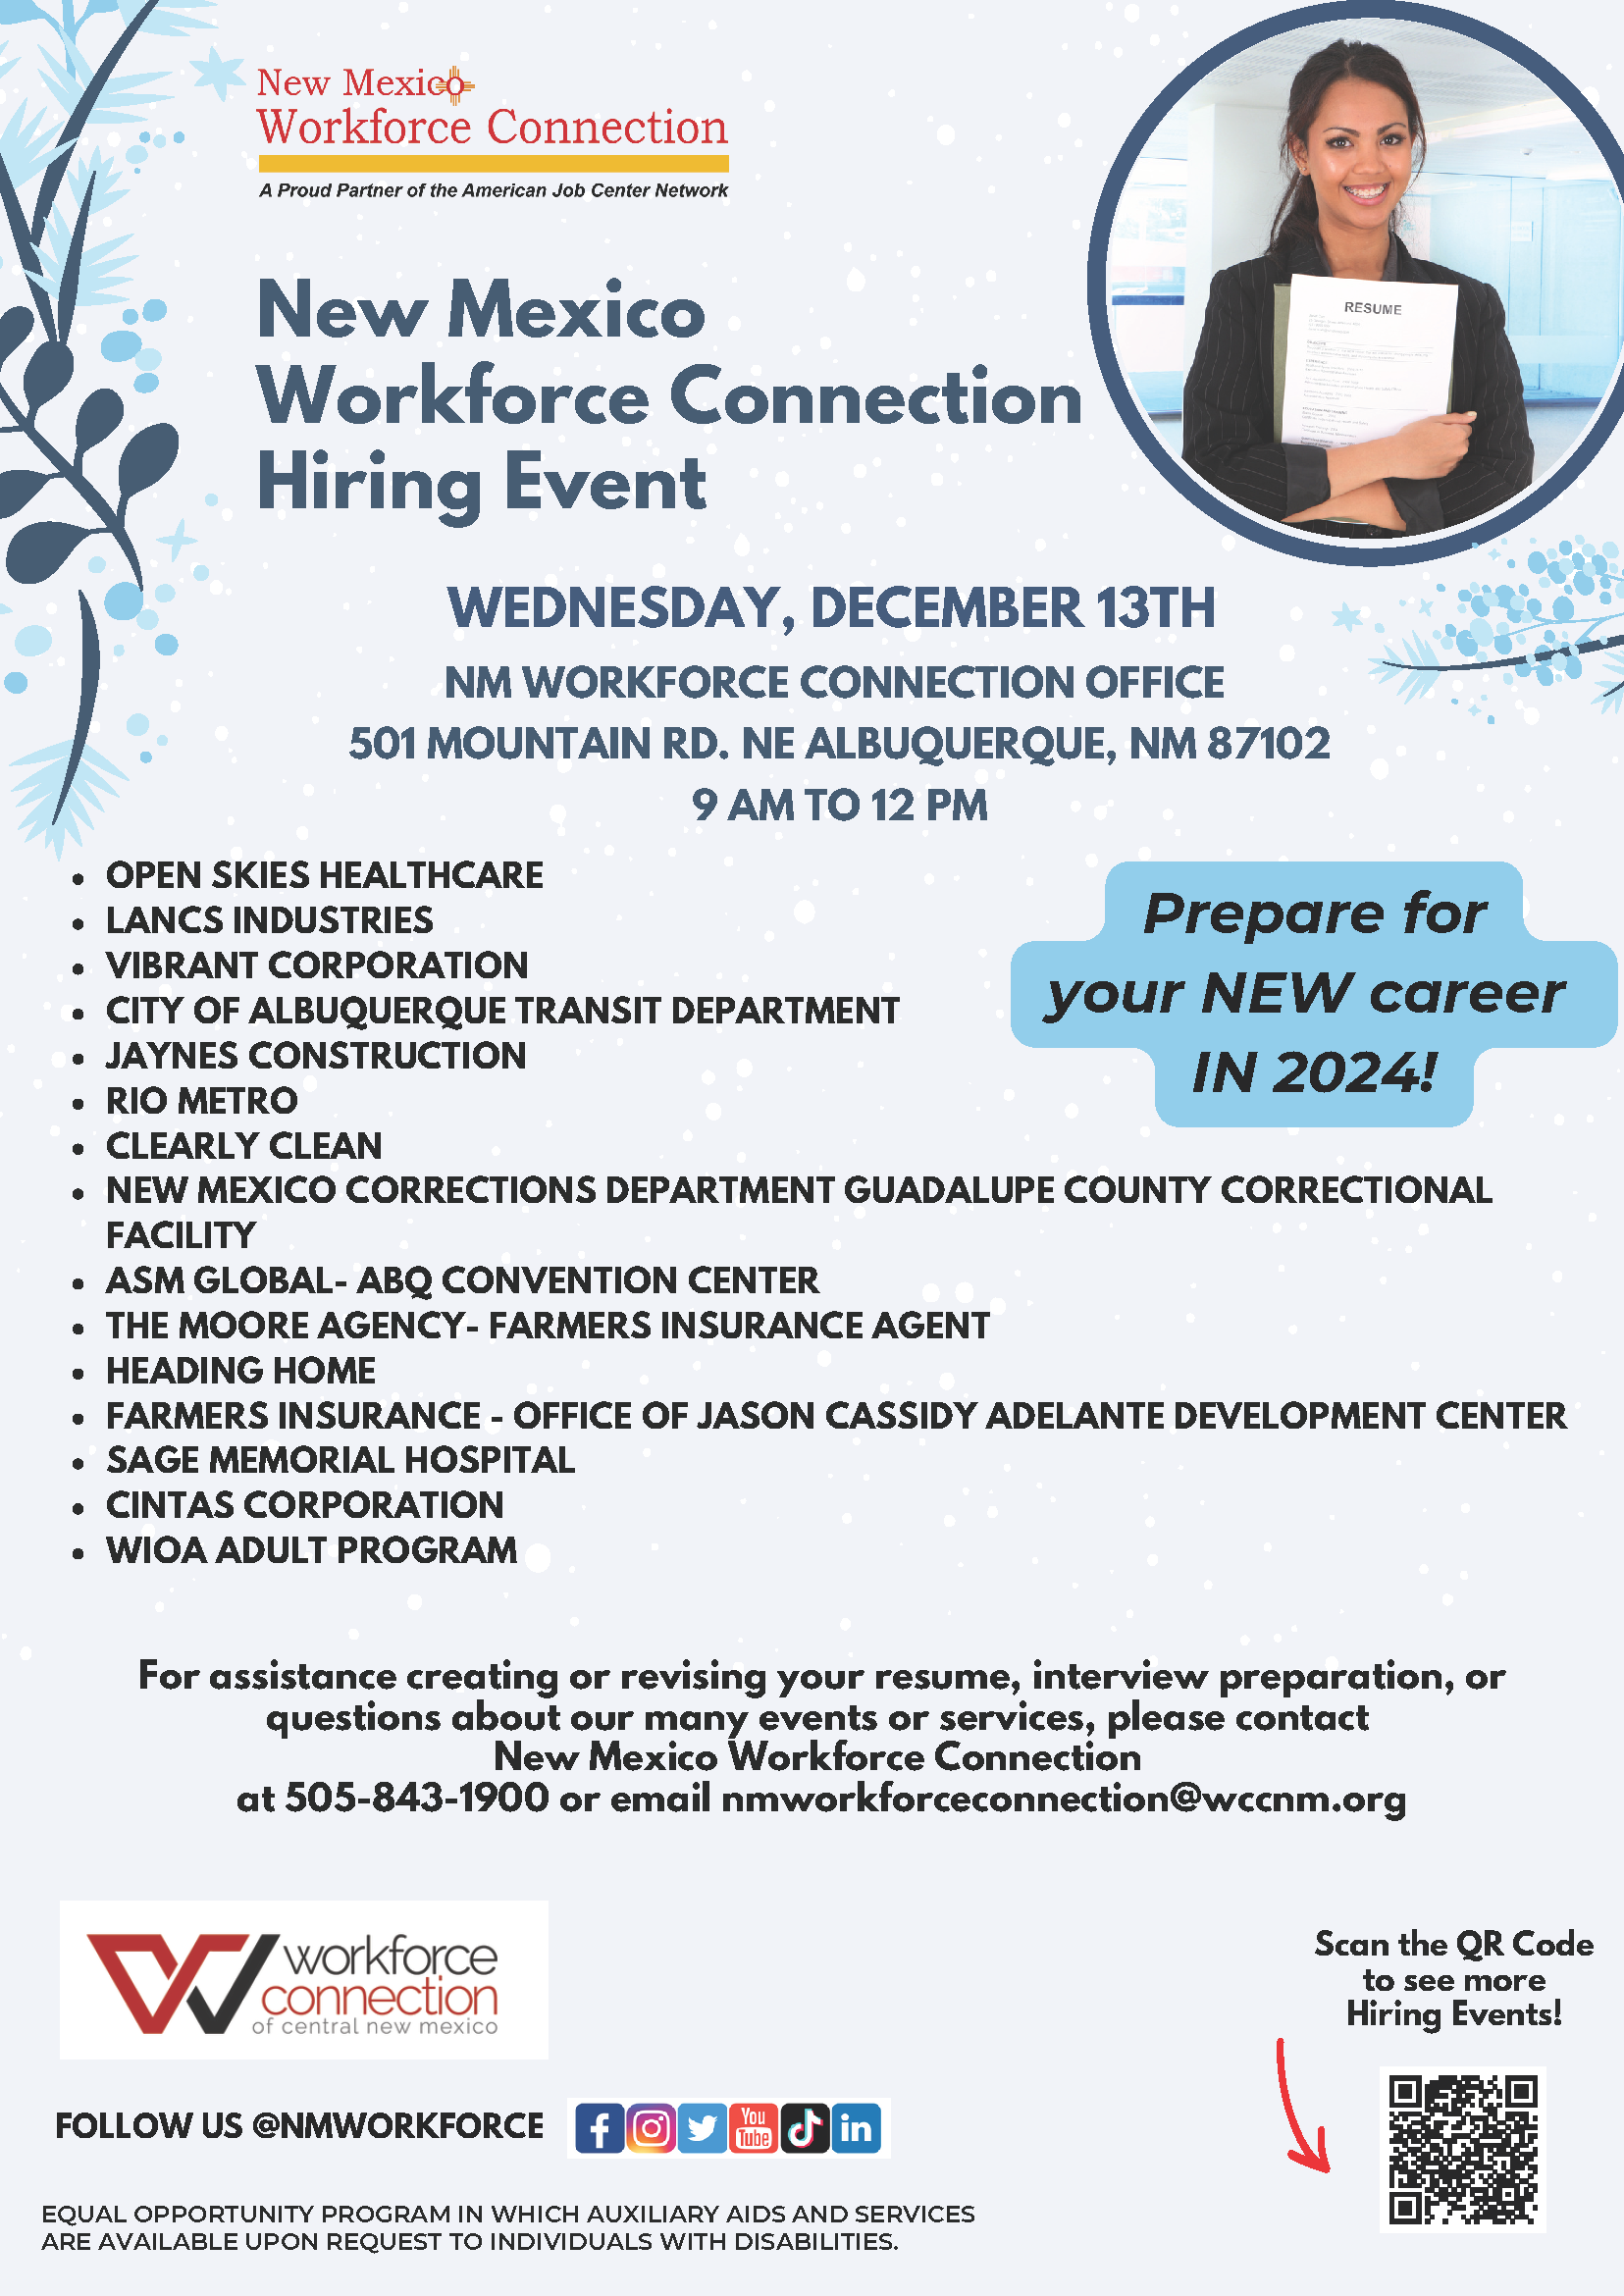 NM Workforce Connection Hiring Event flyer